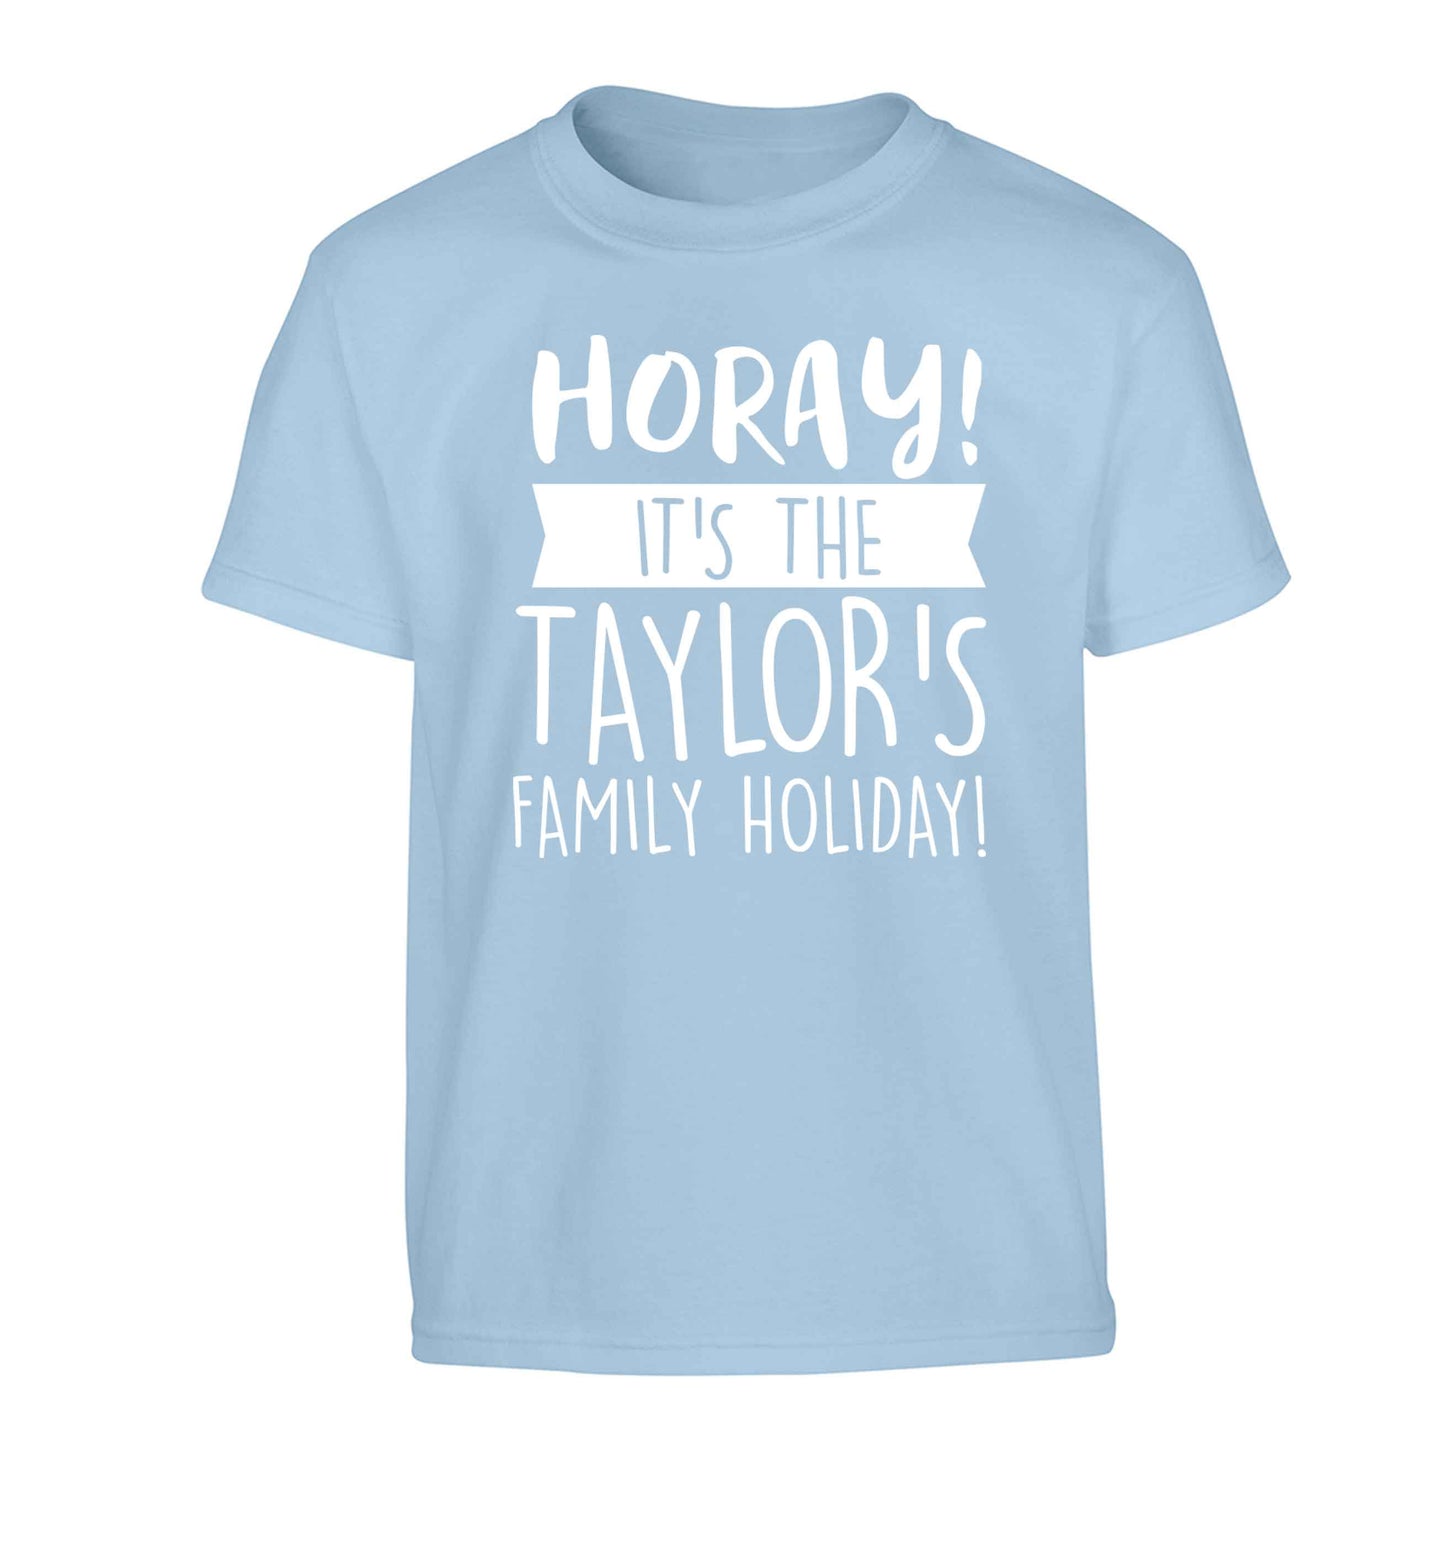 Horay it's the Taylor's family holiday! personalised item Children's light blue Tshirt 12-13 Years